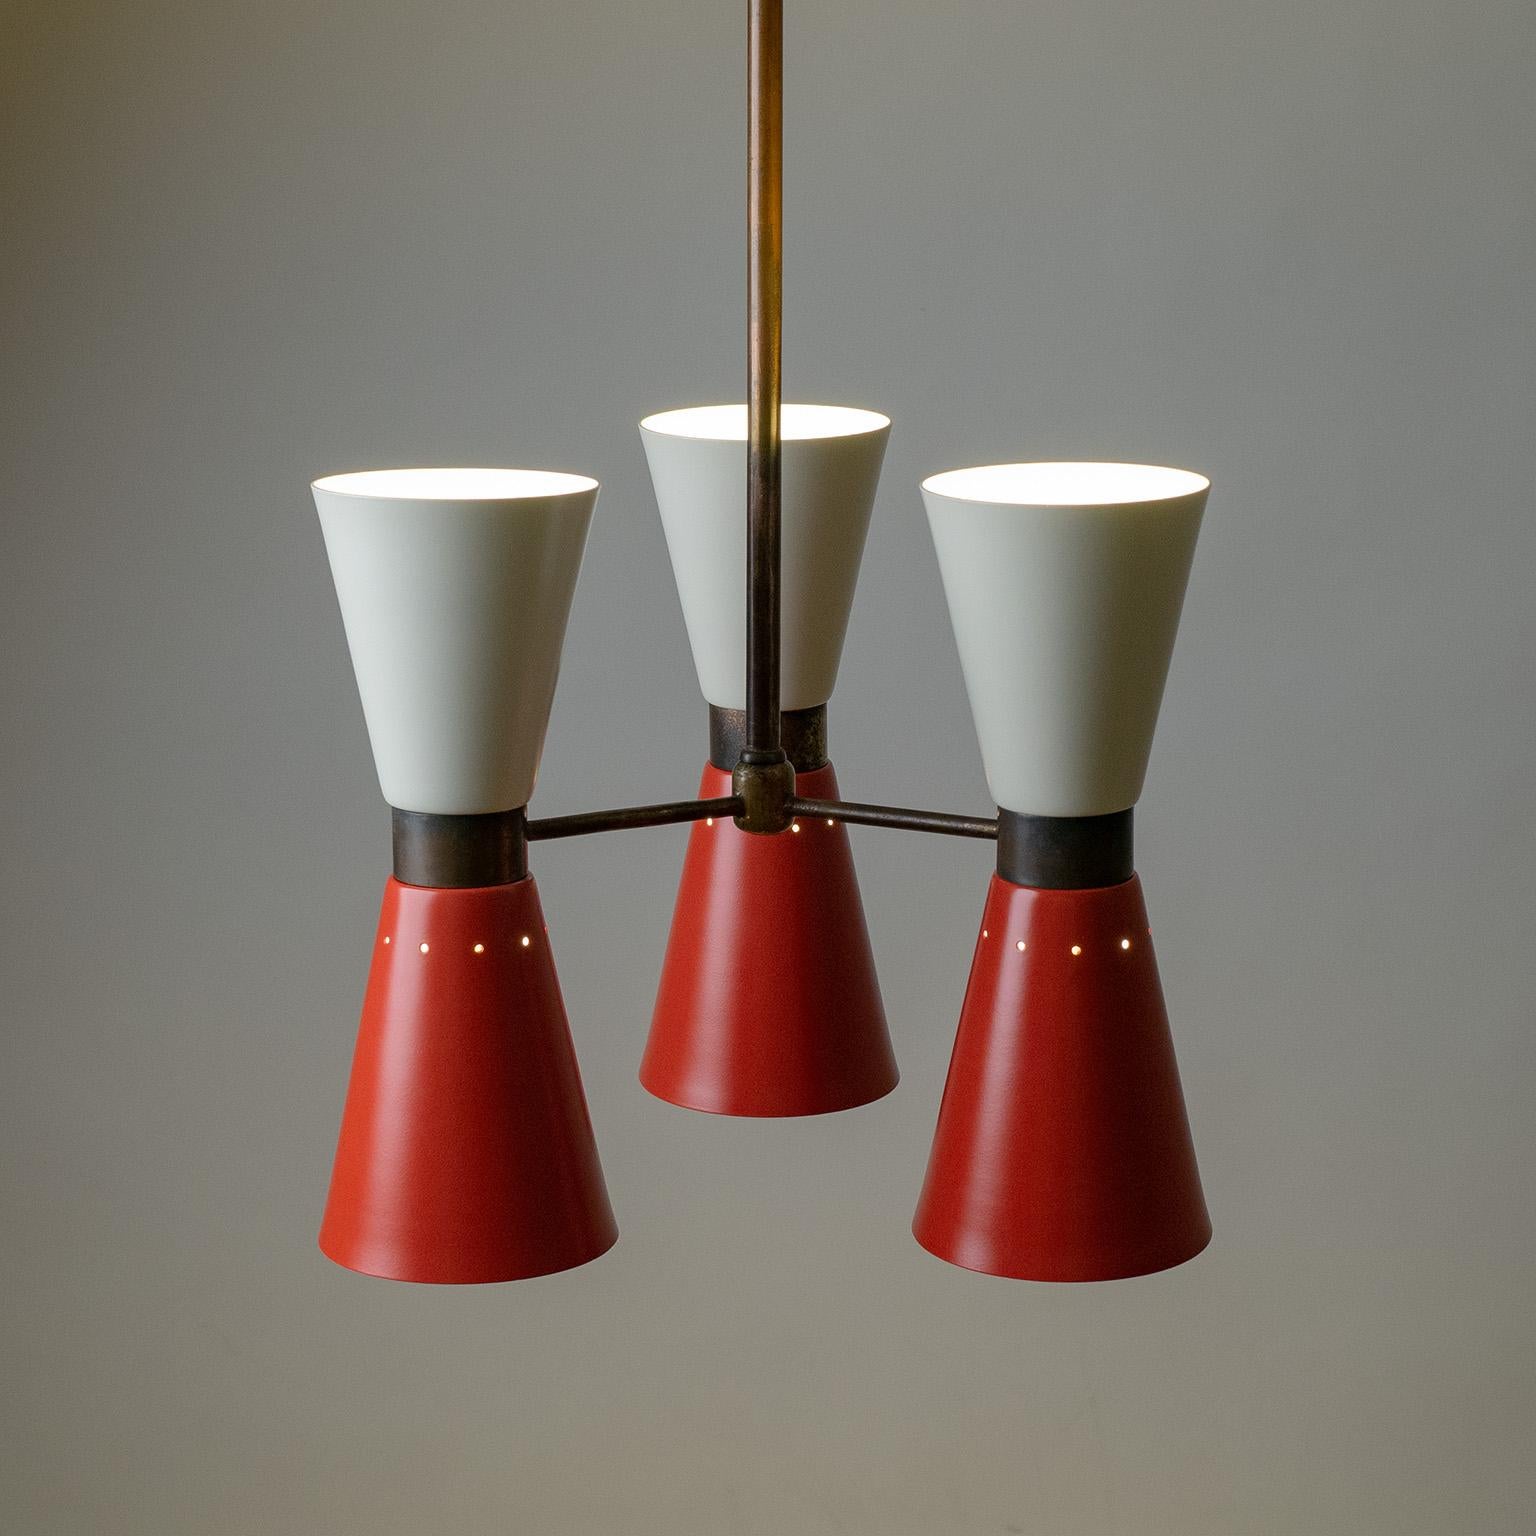 Mid-20th Century Italian Cone Chandelier, 1950s For Sale